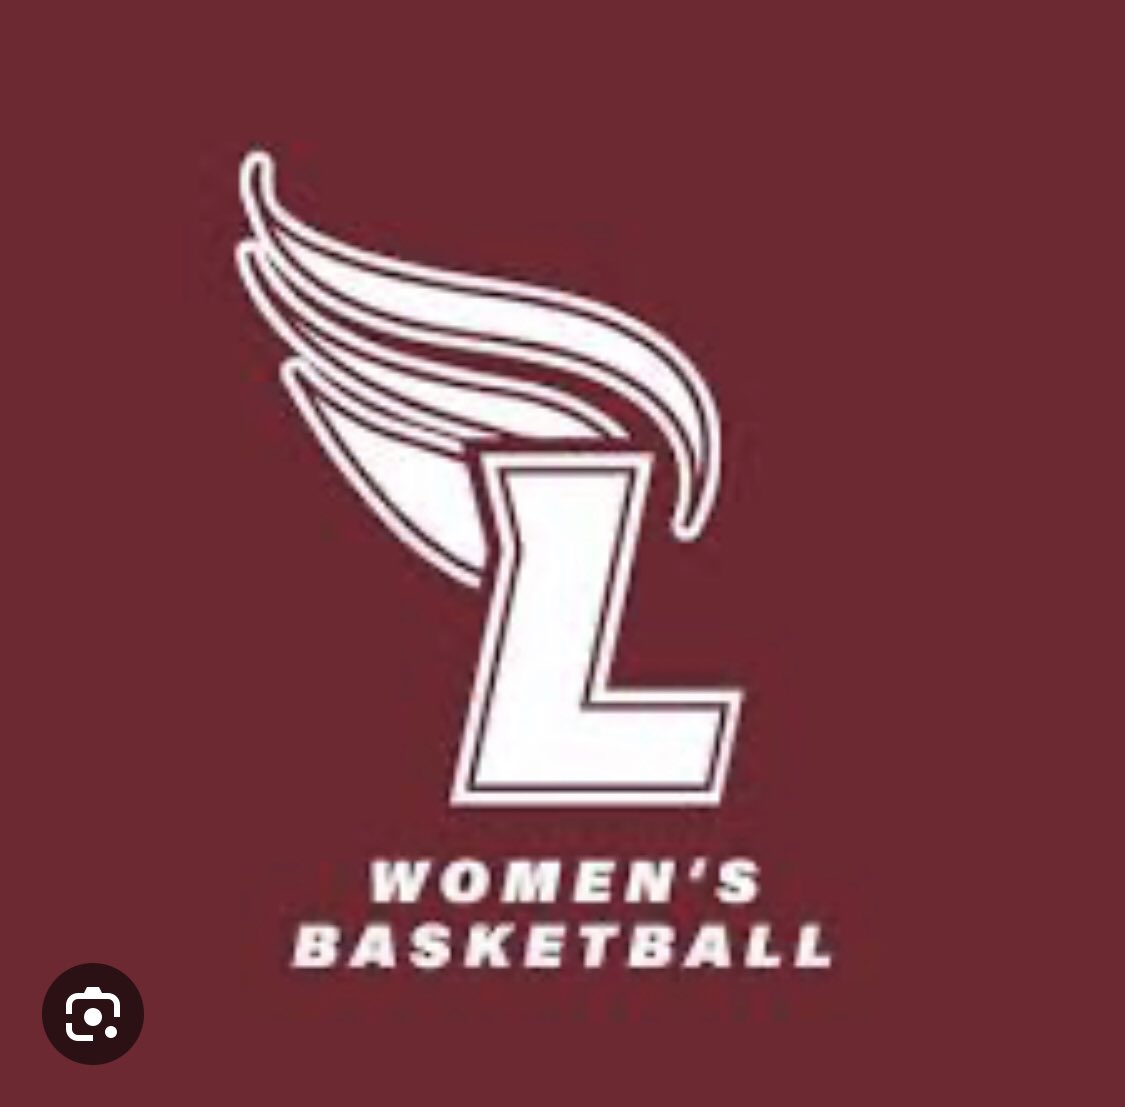 After an amazing phone call with @coachmrowe and @jspangler5, I am so grateful to receive an offer from @LeeUWBB . Thank you so much for believing in me. @AlSoStarz_Veal @ctippslchs @3G_Reps